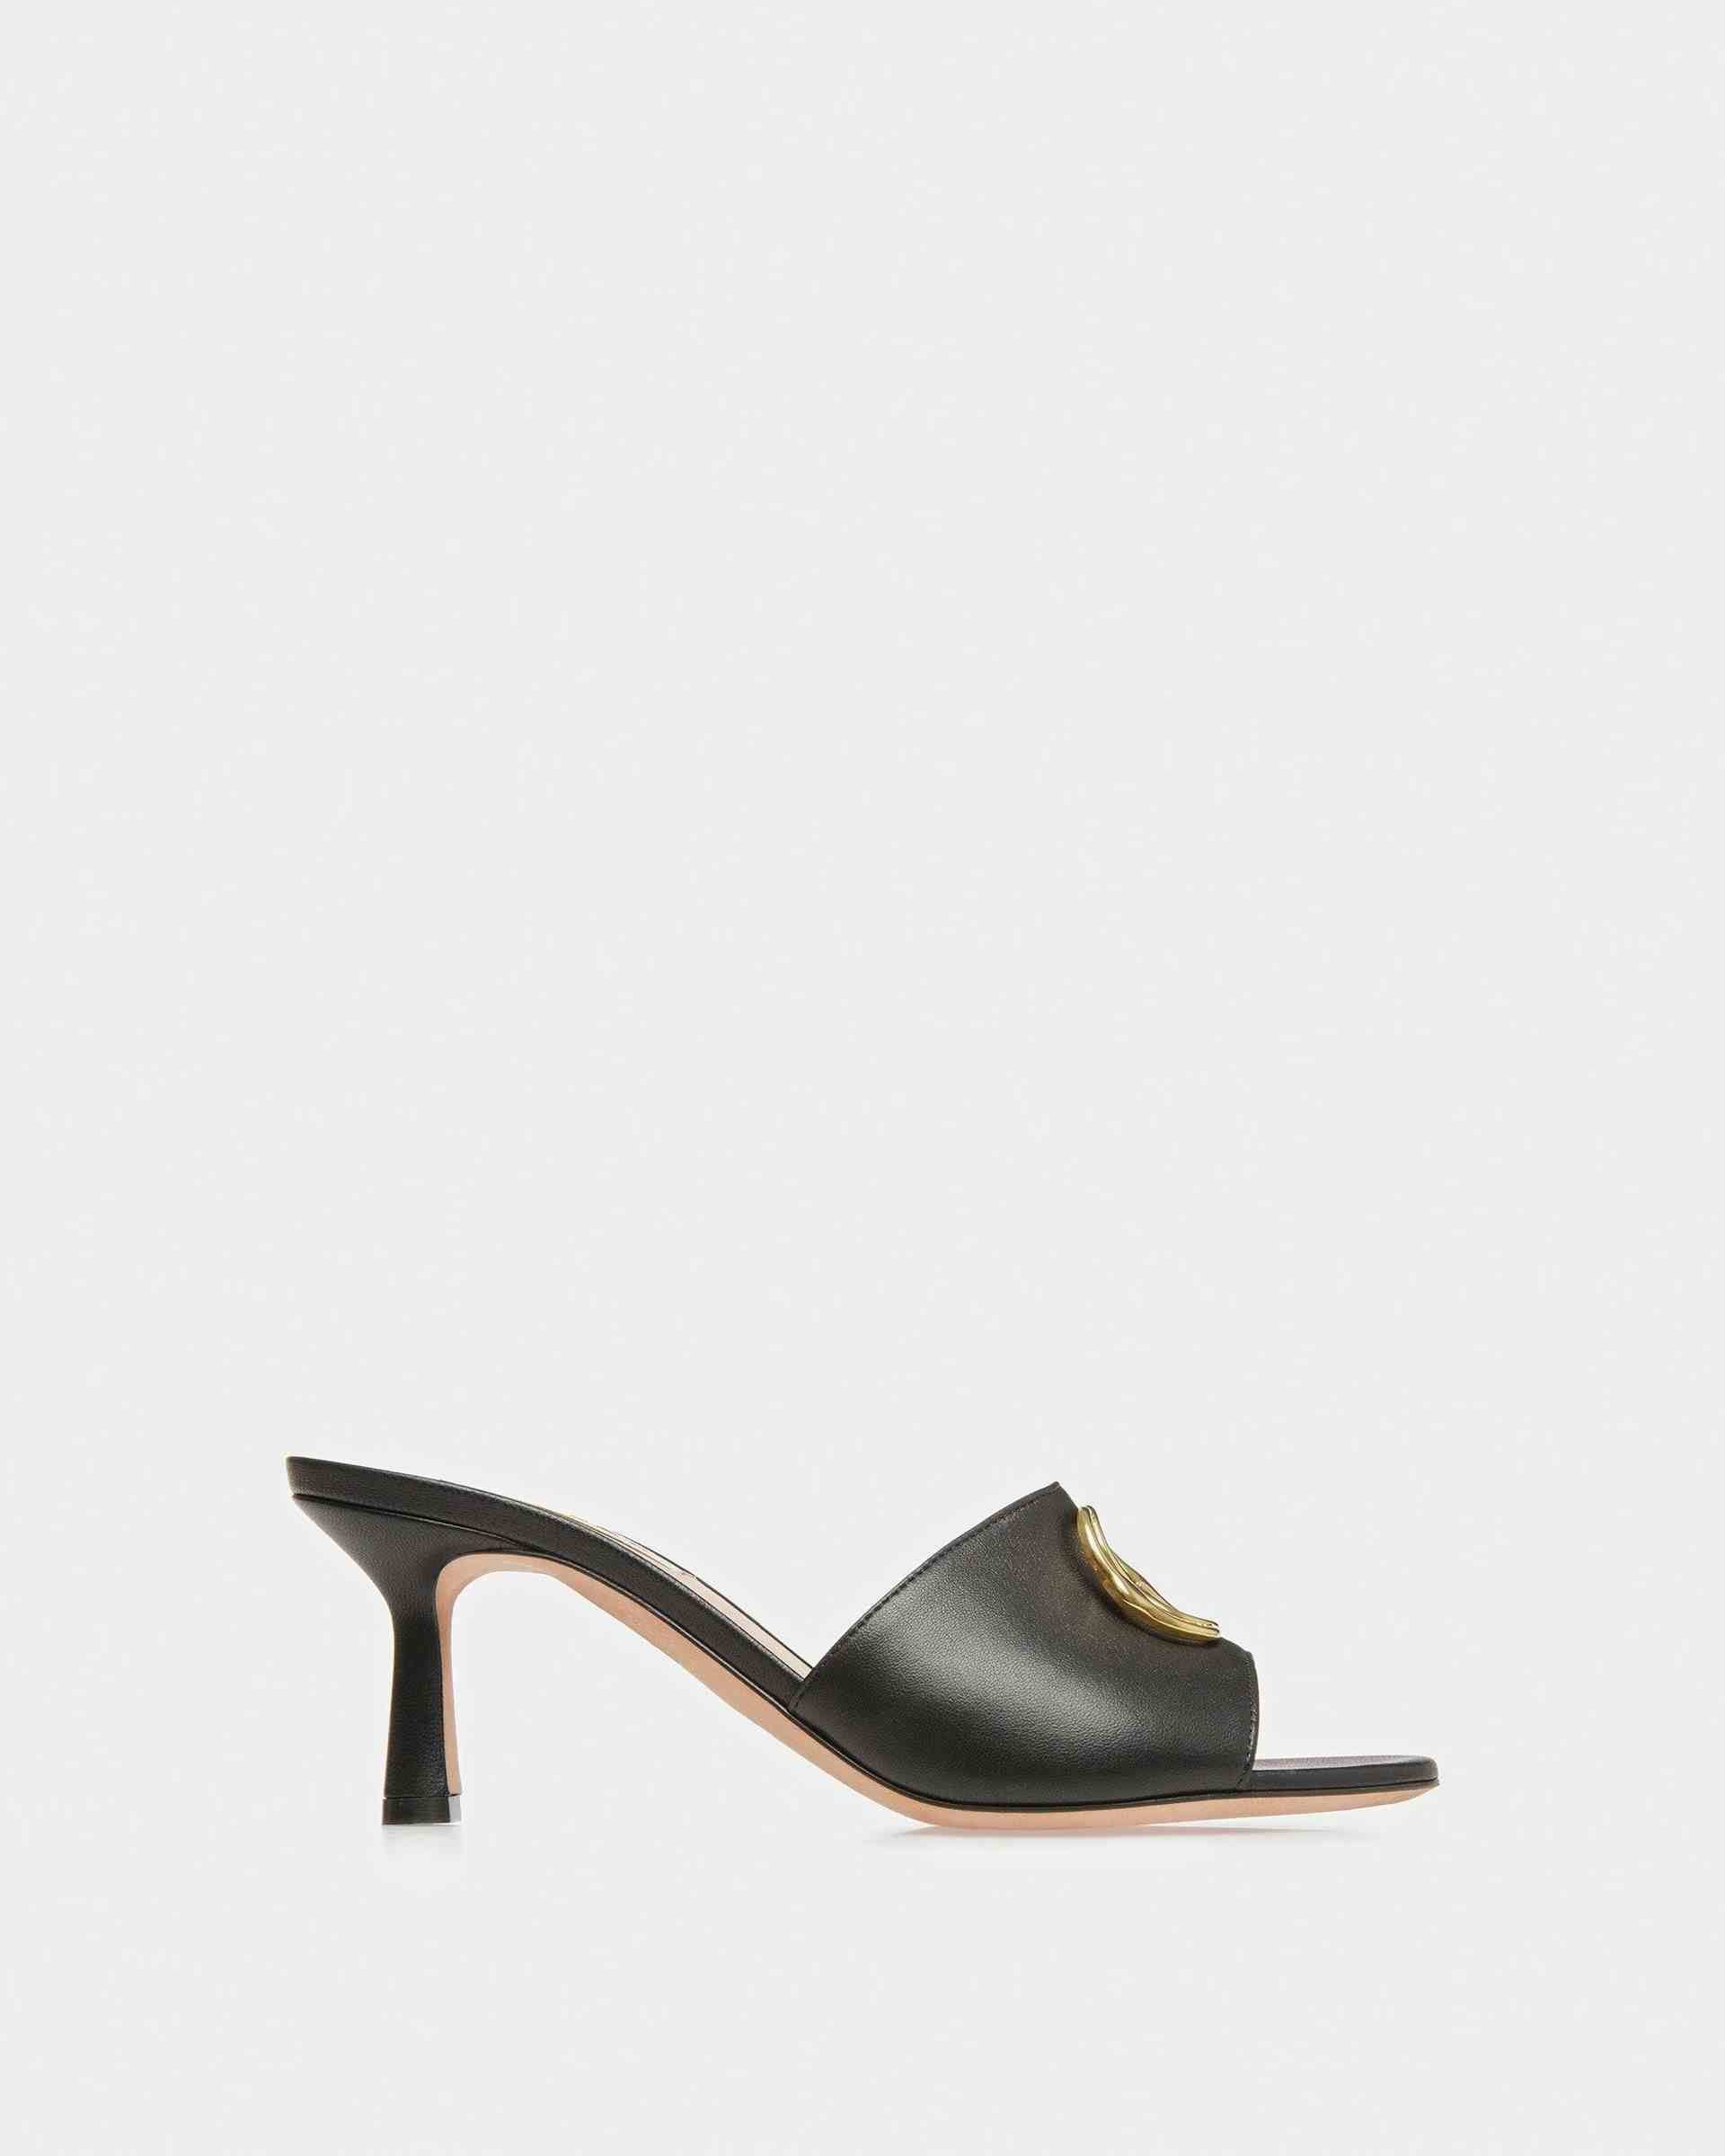 Emblem Sandals In Black Leather - Women's - Bally